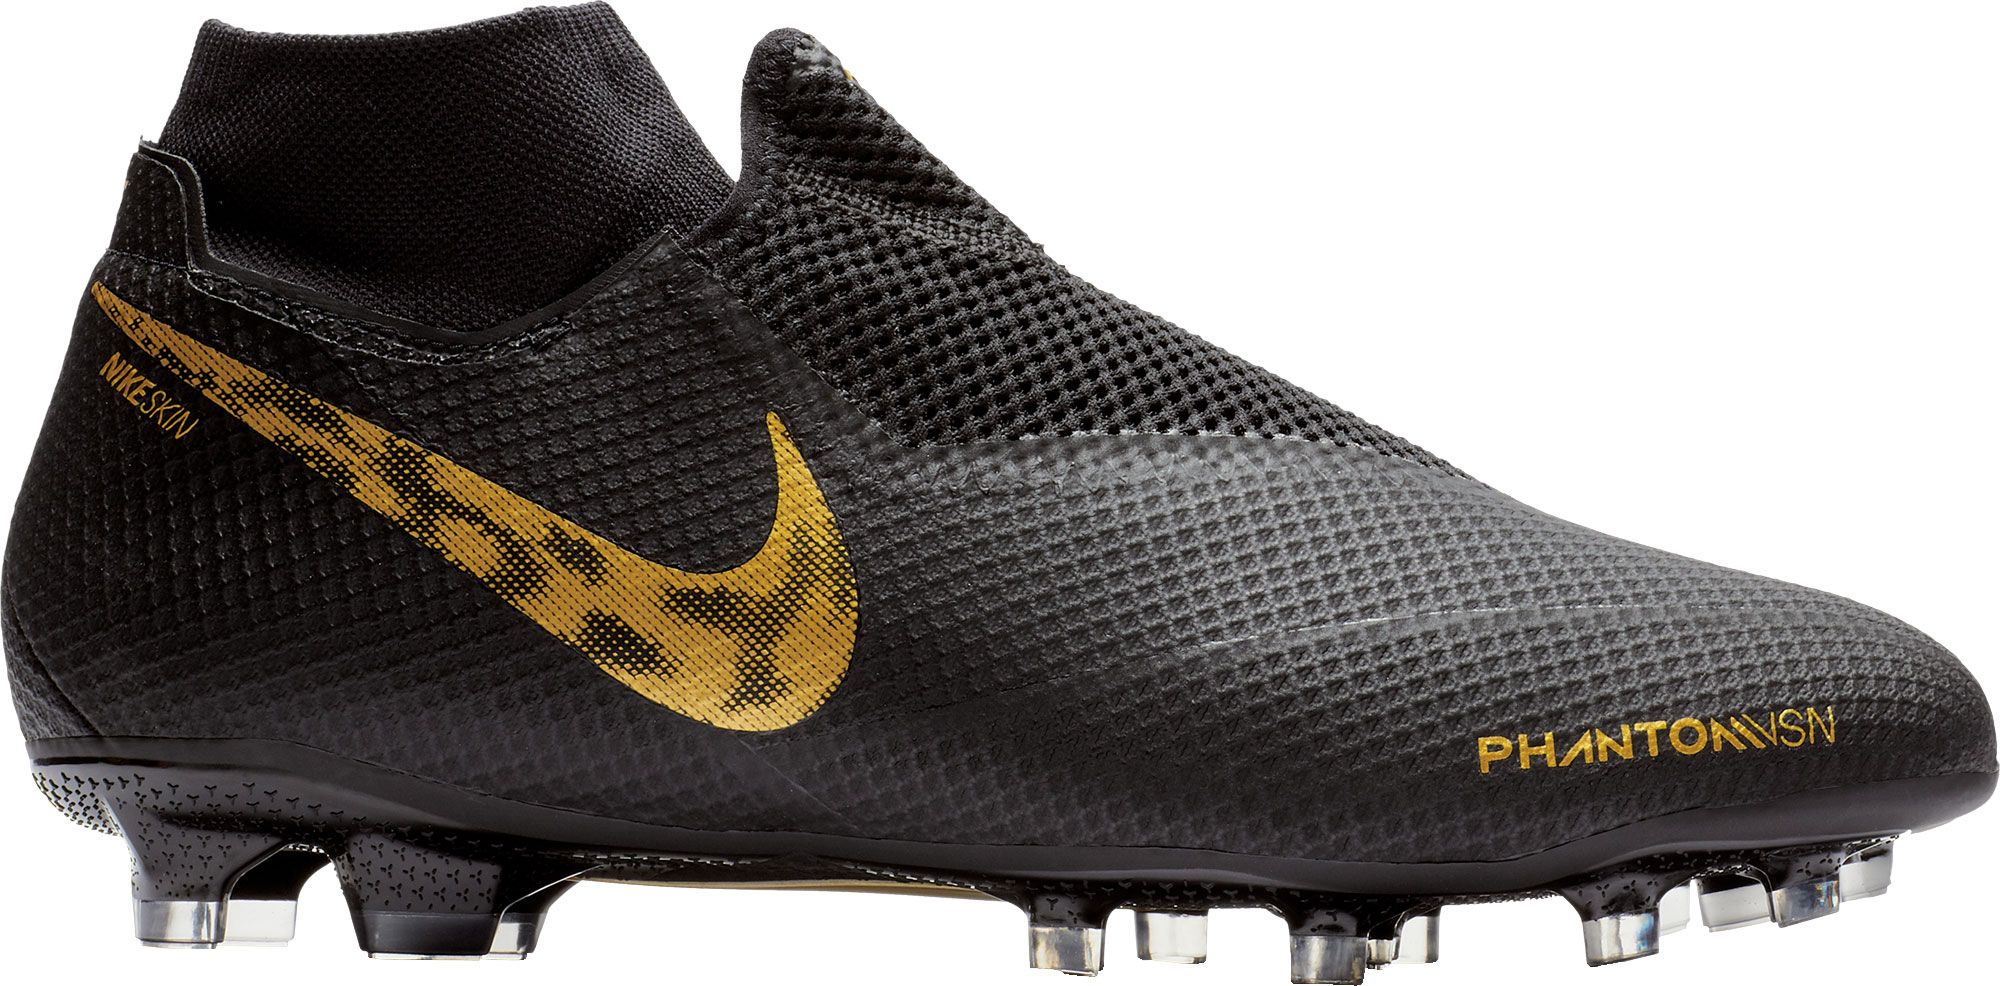 black and gold soccer cleats nike